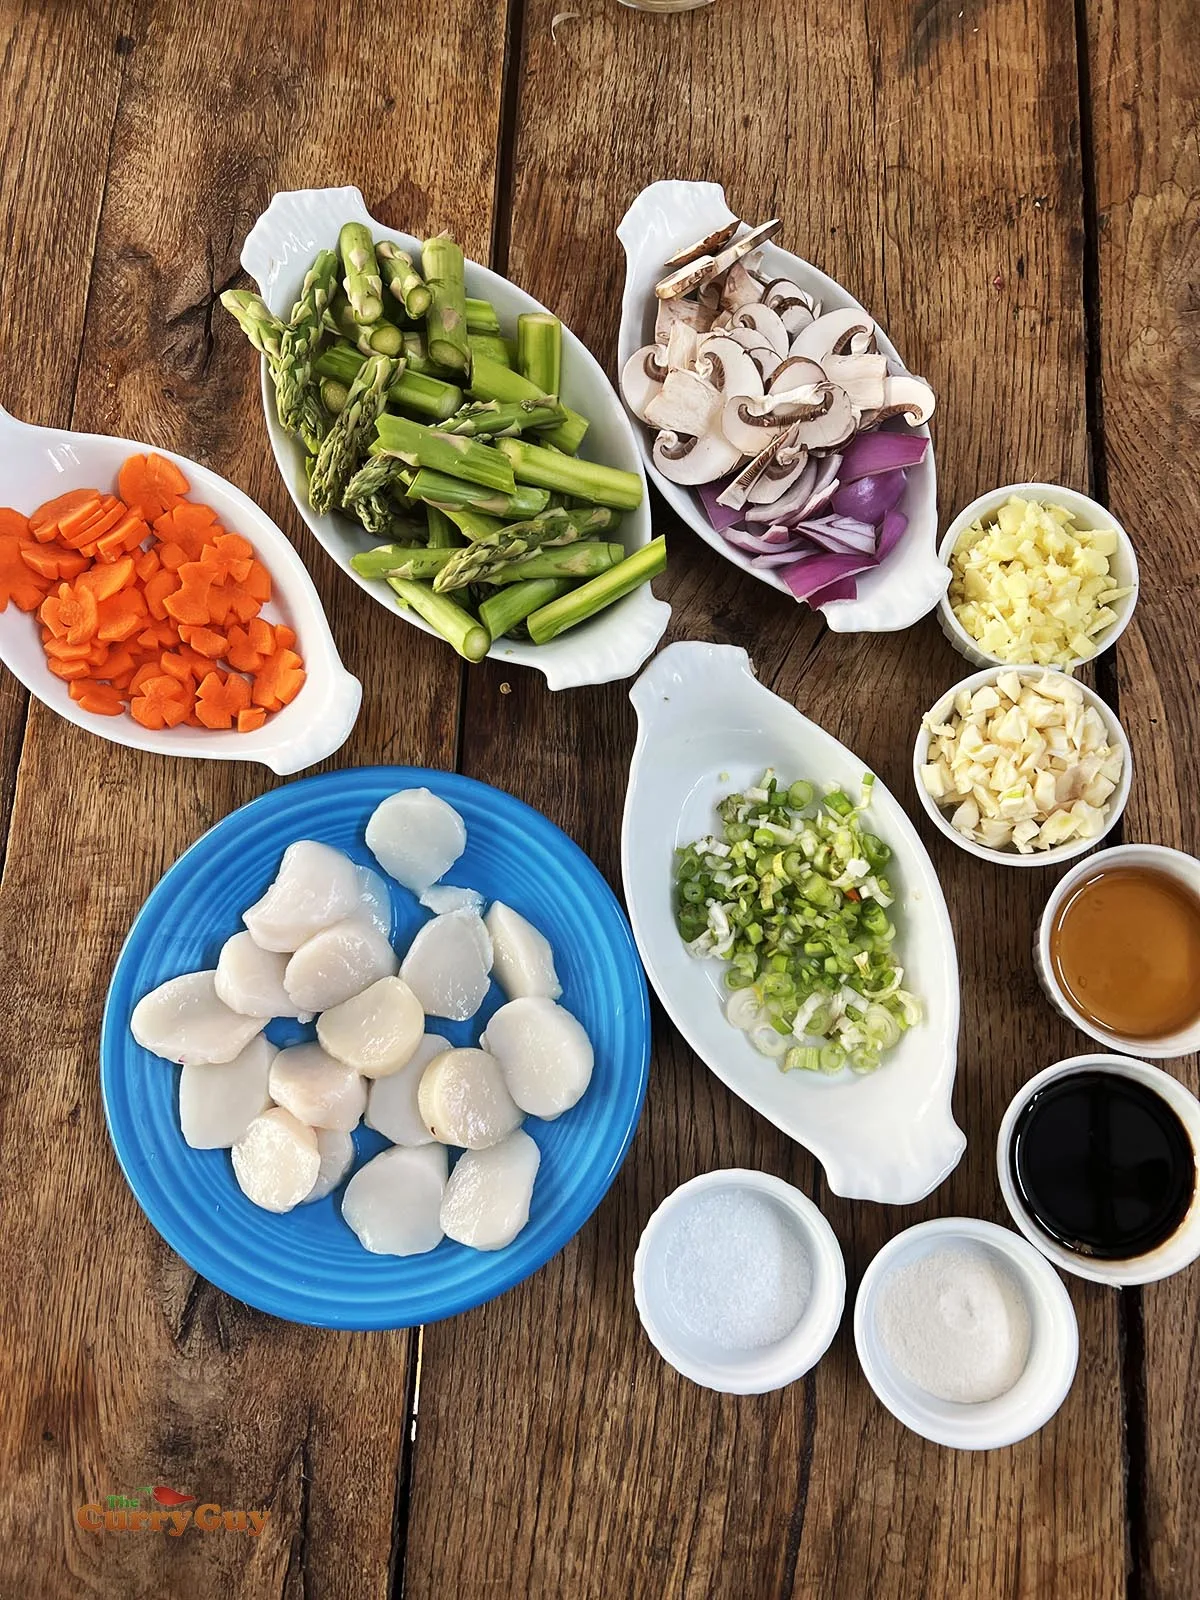 Prepared ingredients for Chinese scallops and asparagus